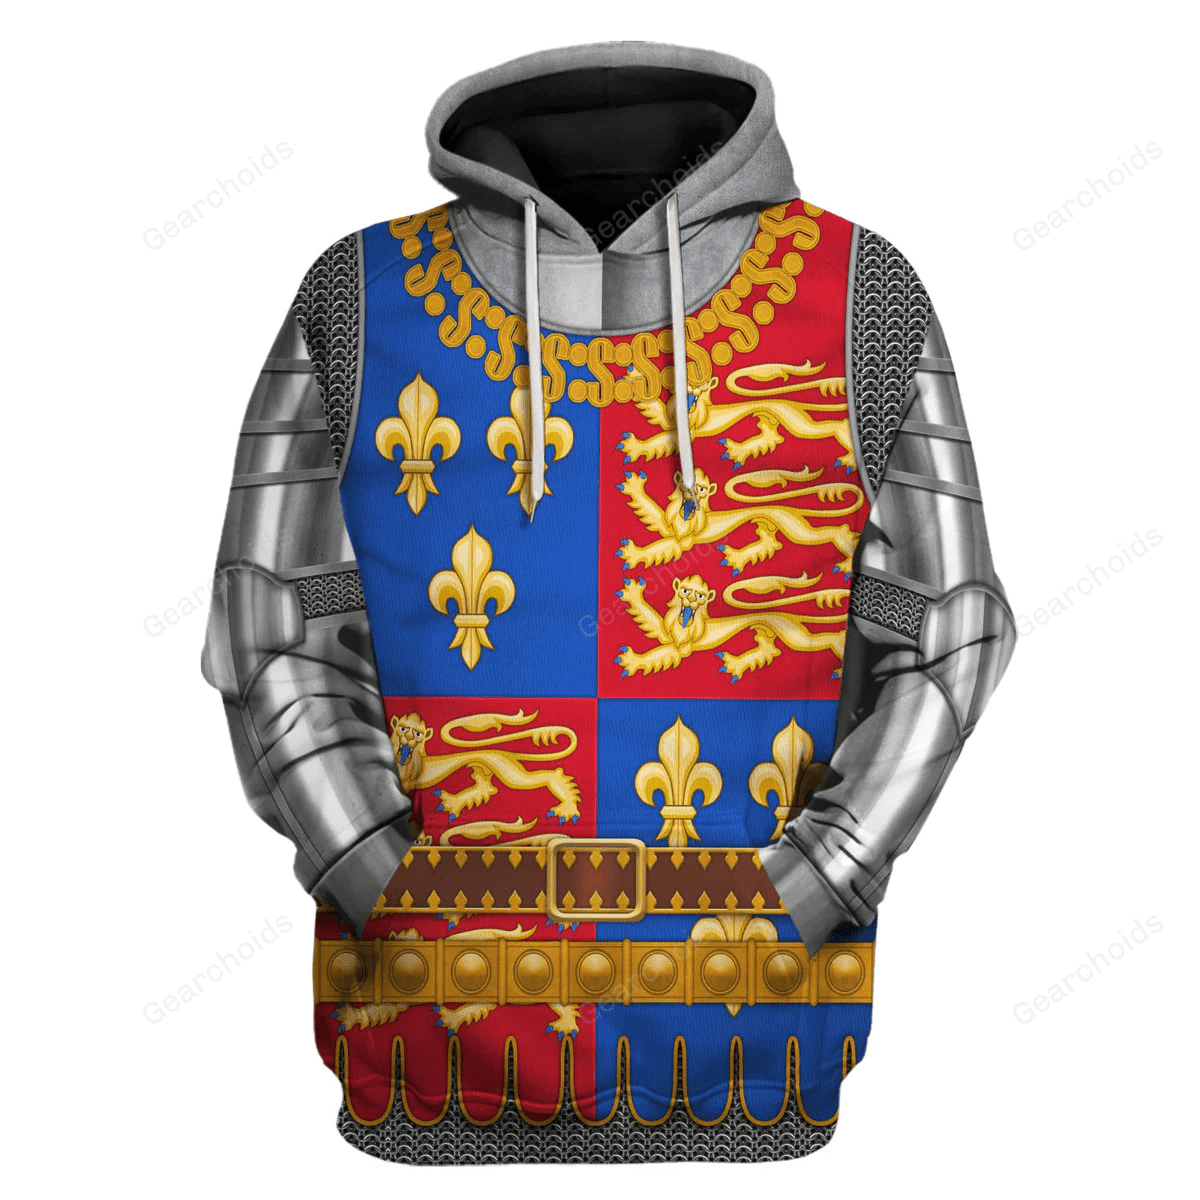 Gearchoids Henry V Amour Knights Costume Hoodie Sweatshirt T-Shirt Sweatpants